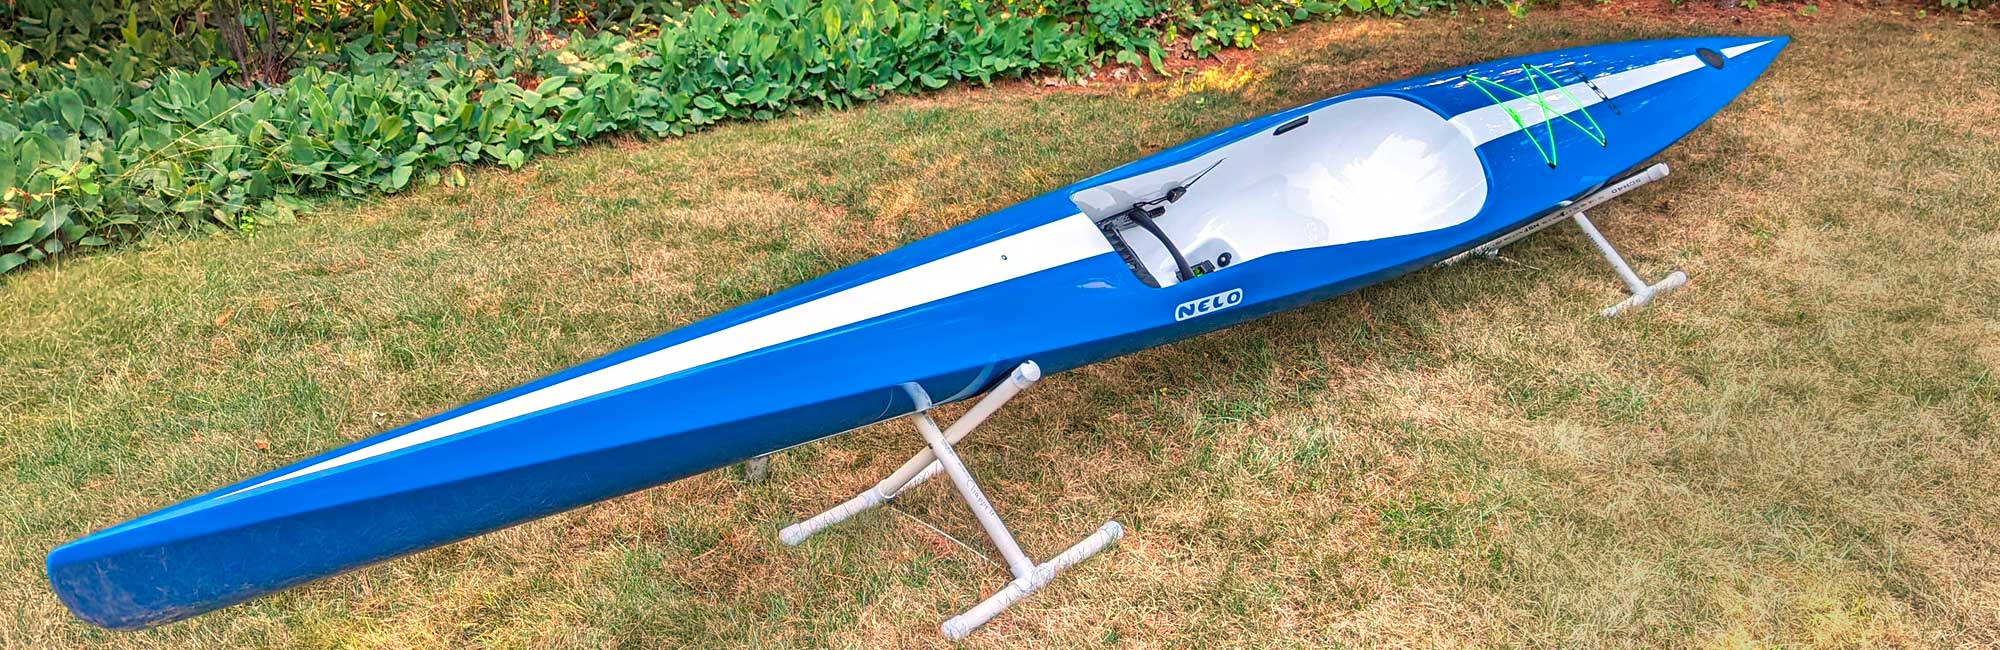 nelo 540 for sale, price and availability